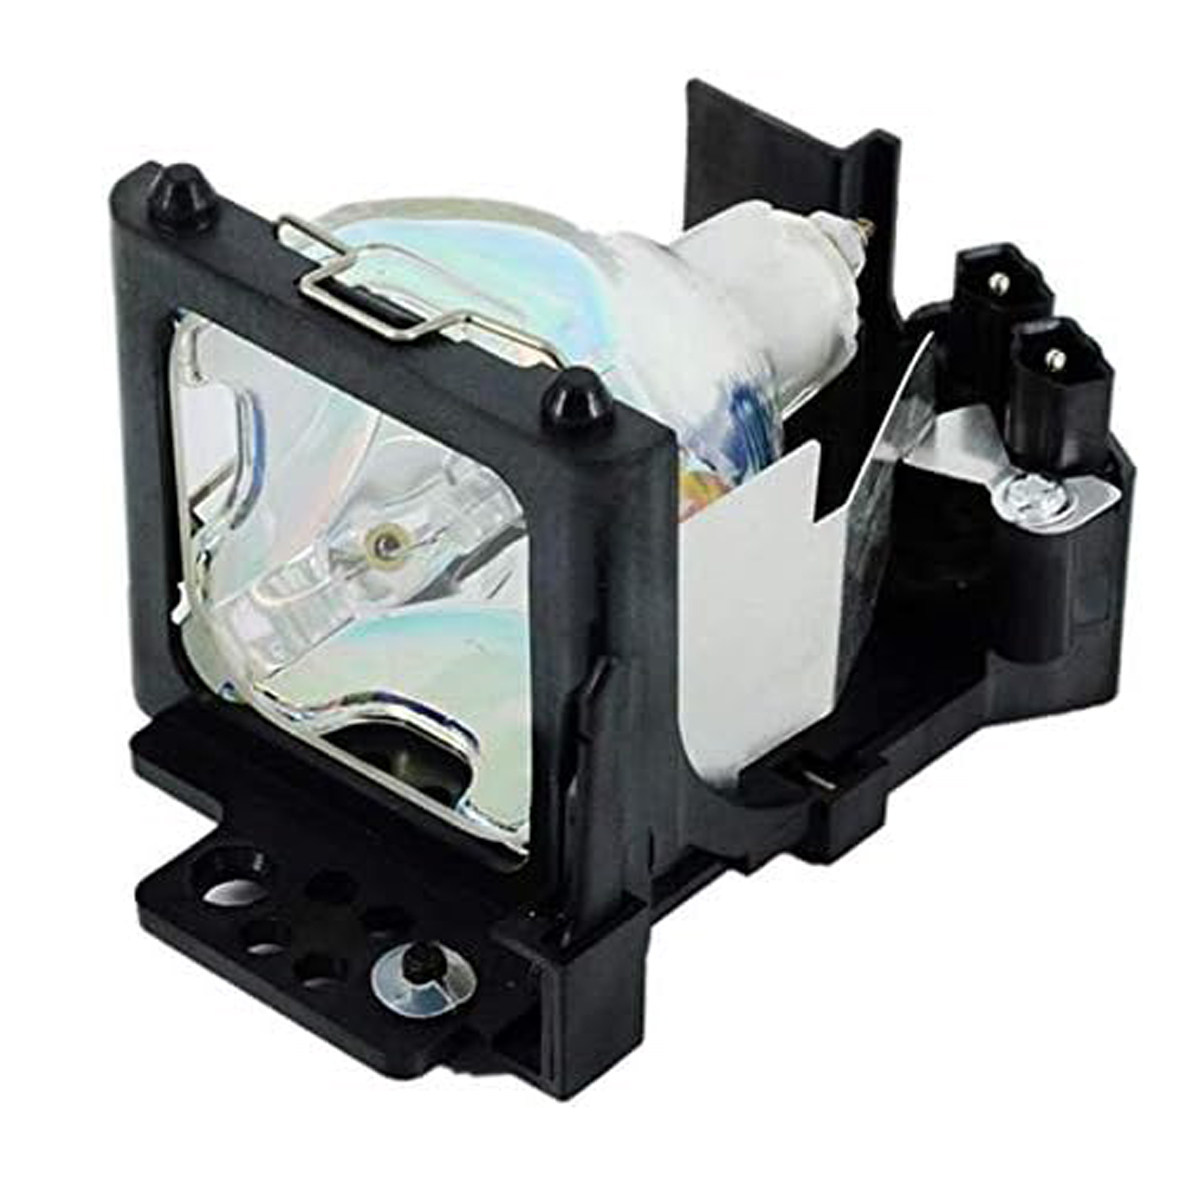 Replacement Projector lamp DT00511 For Hitachi CP-HS1000 CP-HS1050 CP-HS1060 CP-HX1095